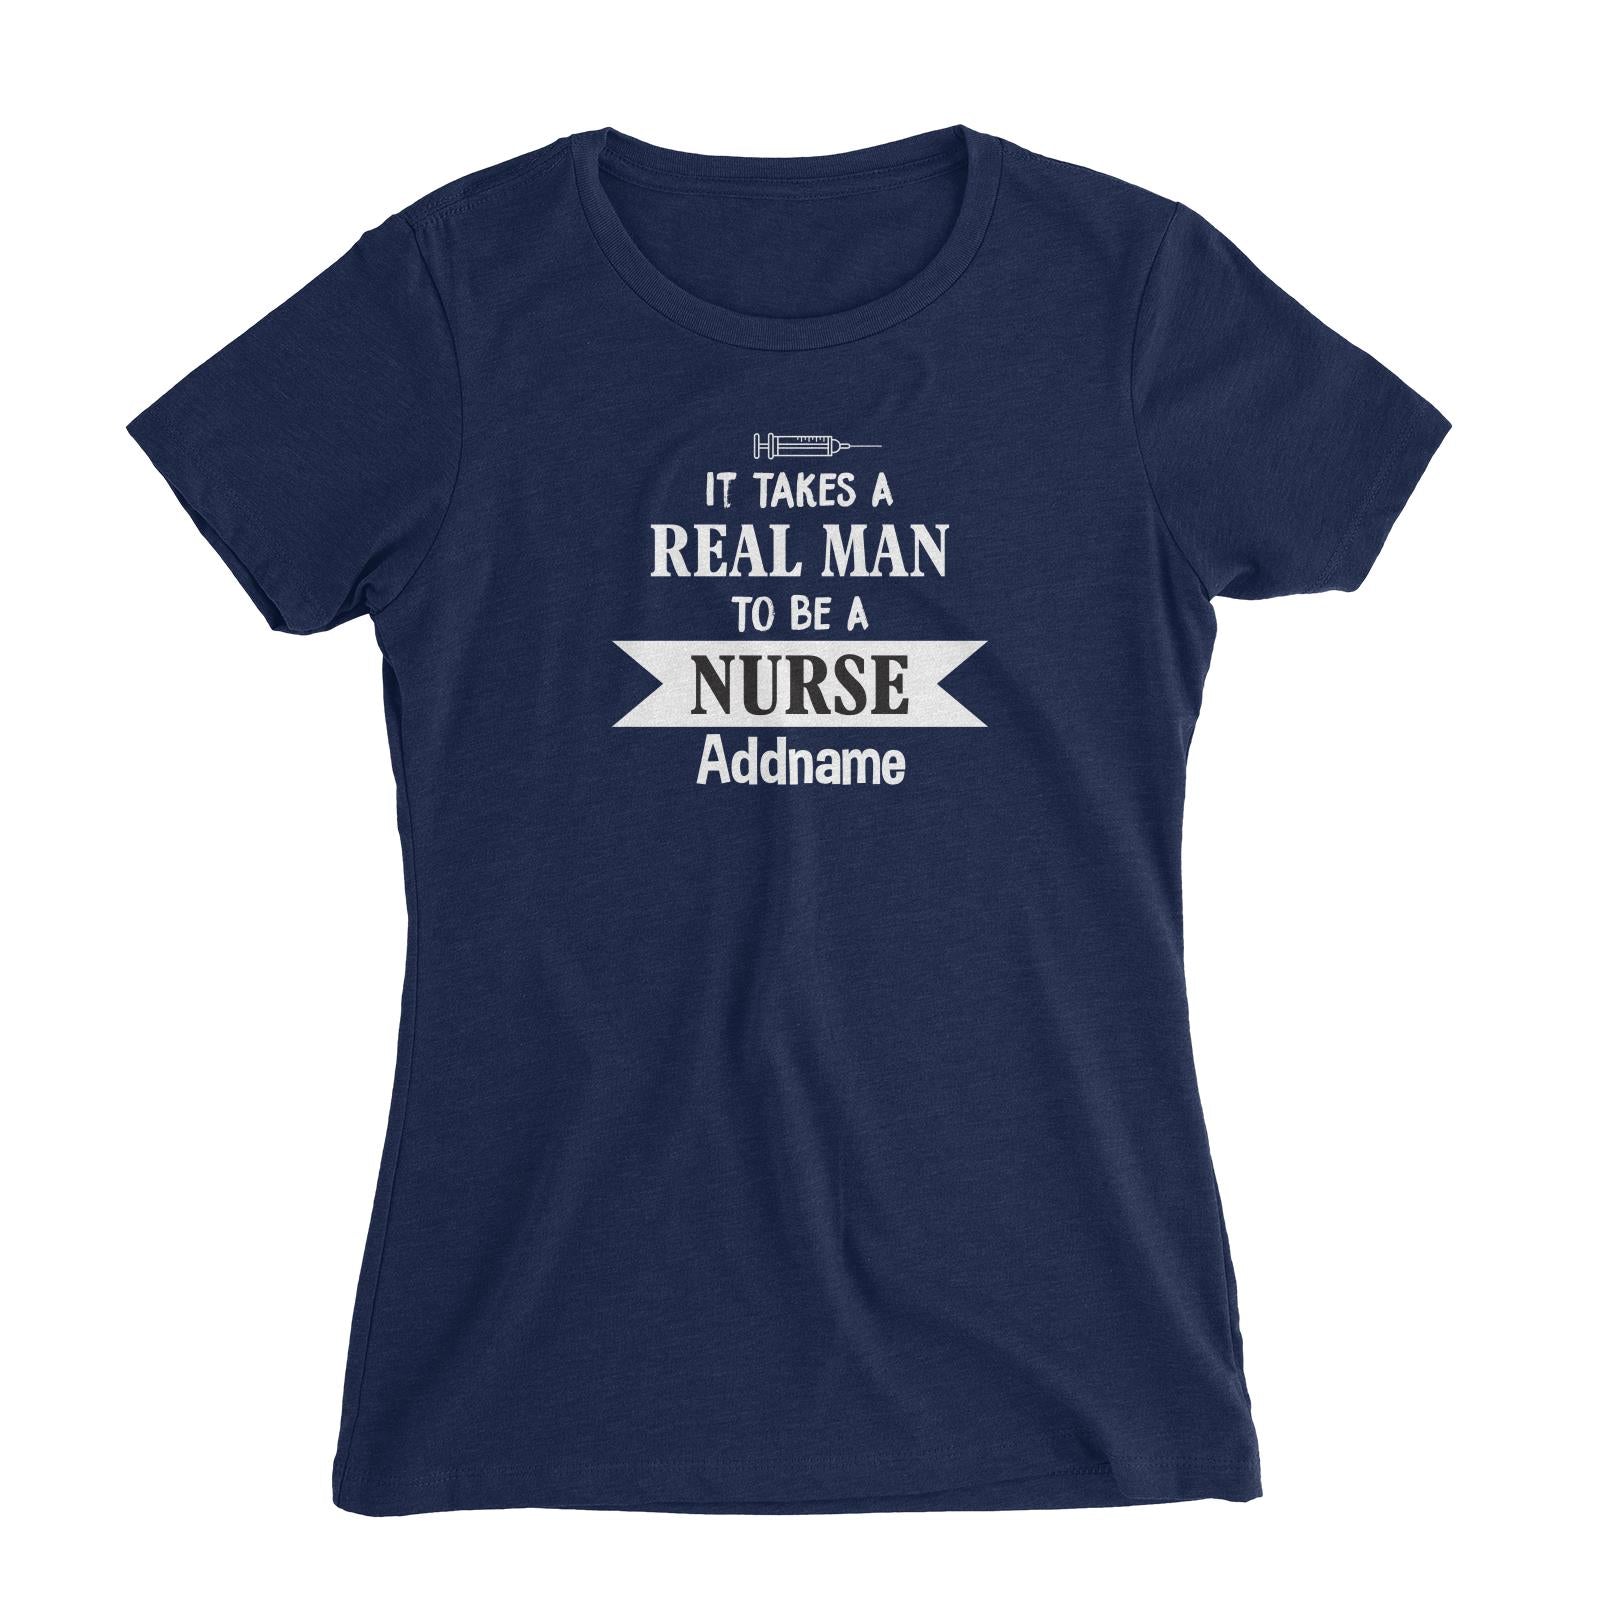 It Takes a Real Man to be a Nurse Women's Slim Fit T-Shirt